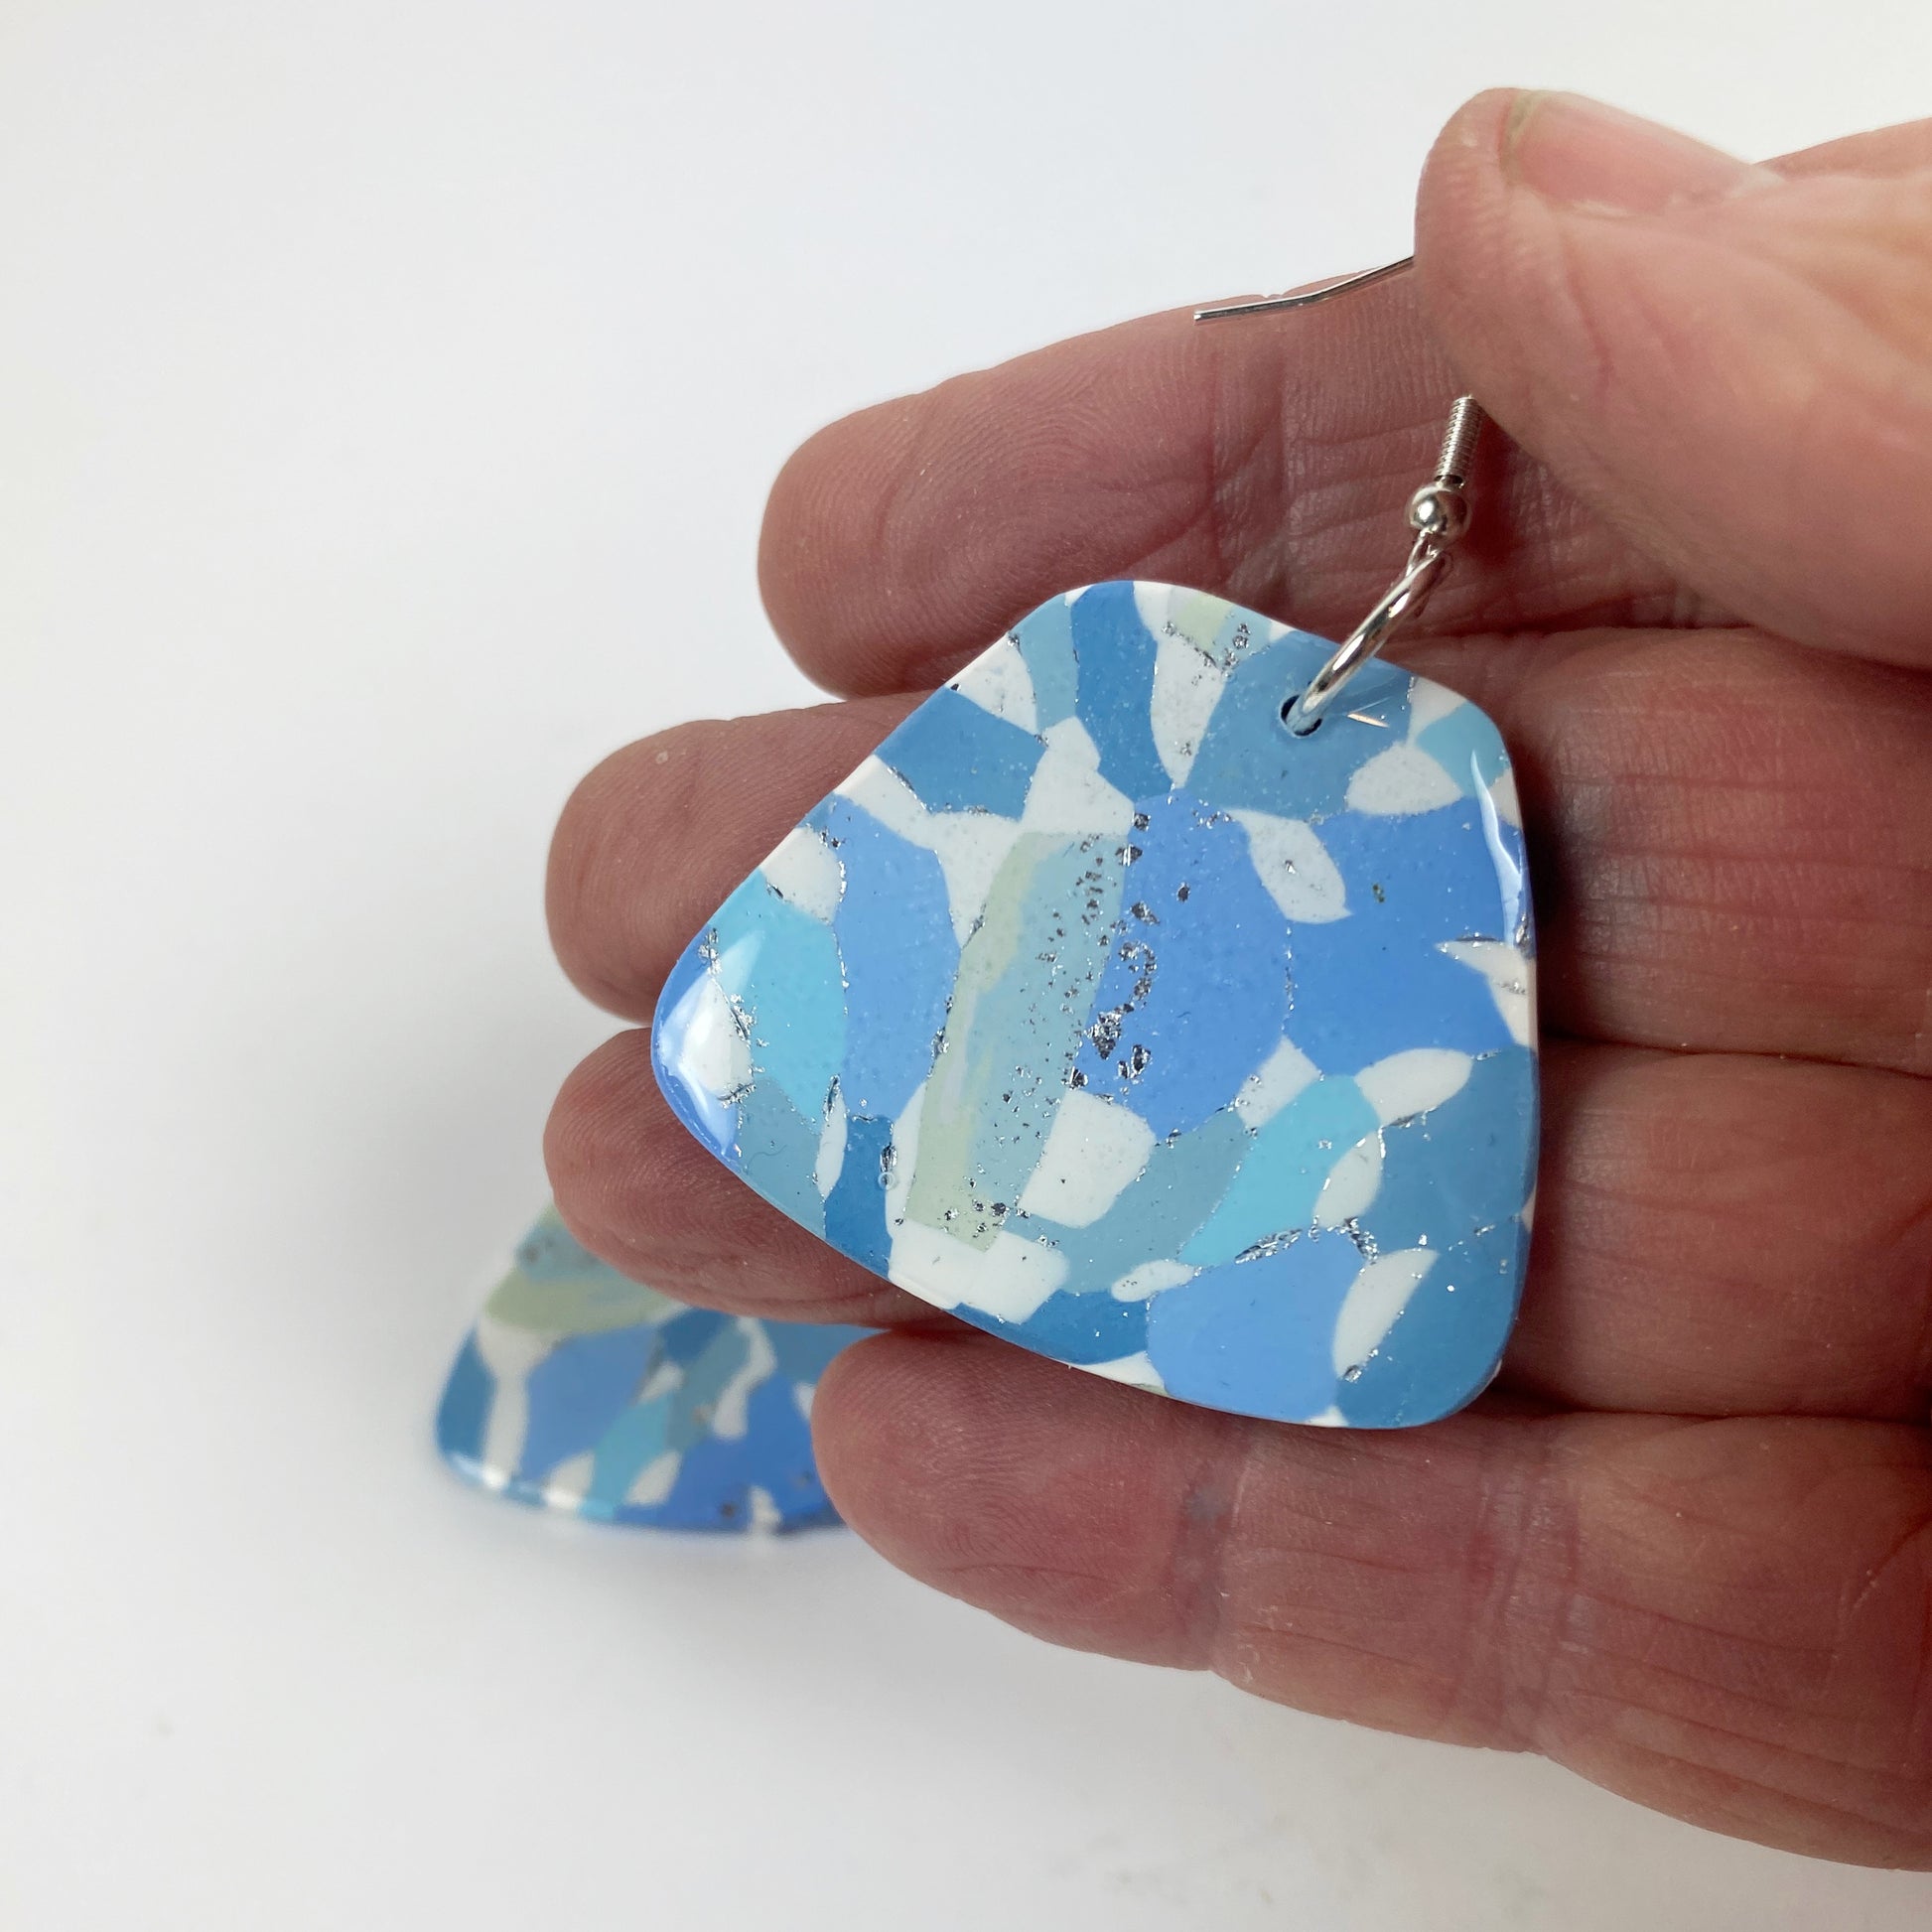 Moody Blue Handmade Polymer Clay Dangle Sleek Symmetry Earrings handheld for size reference